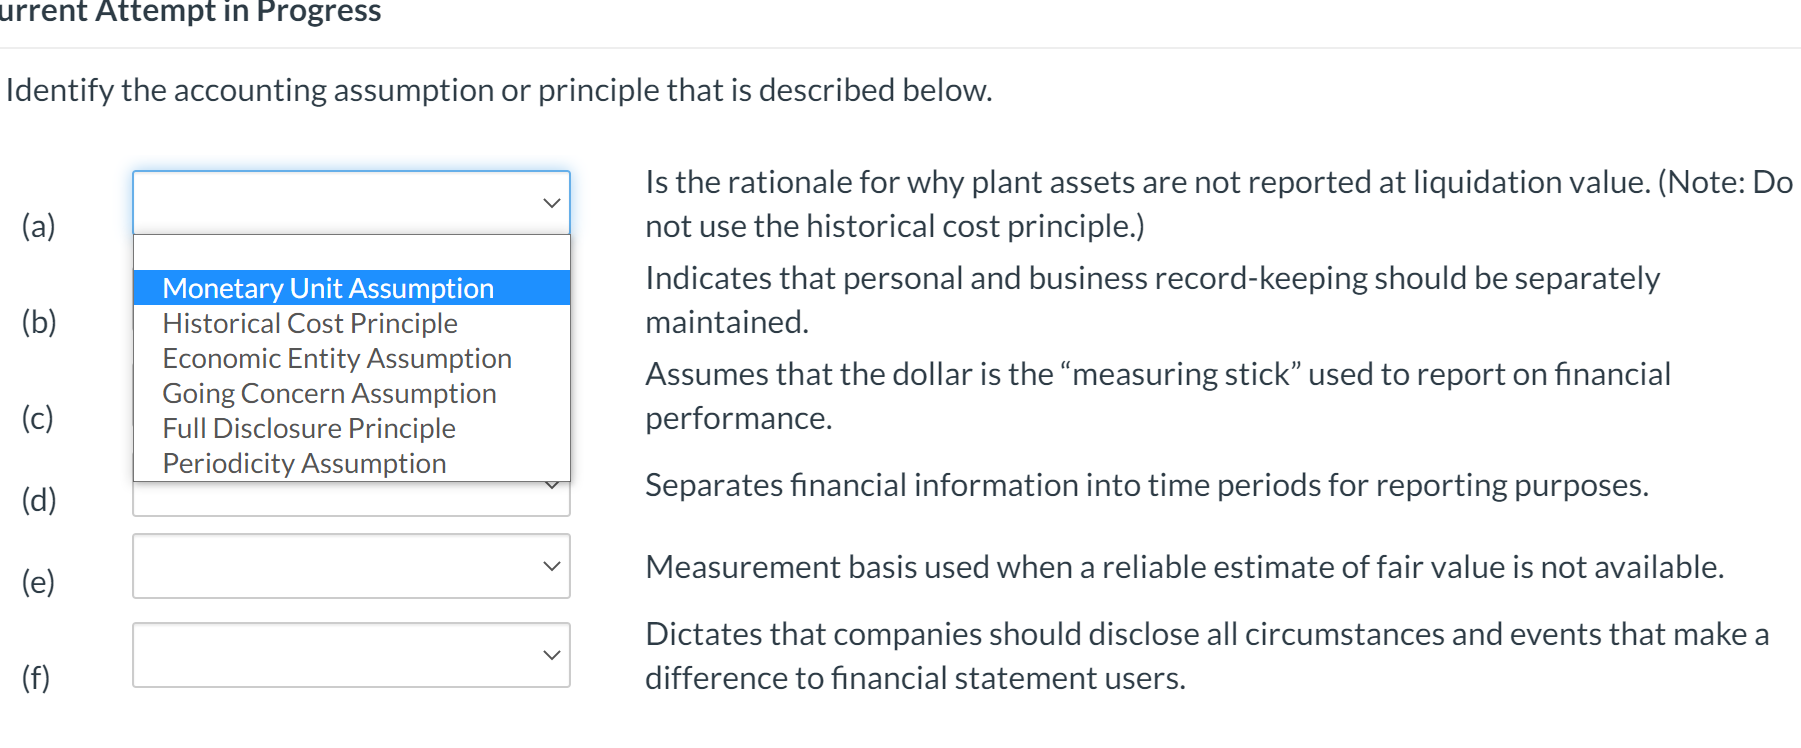 Identify the accounting assumption or principle that is described below.
Is the rationale for why plant assets are not reported at liquidation value. (Note: Do
not use the historical cost principle.)
(a)
Indicates that personal and business record-keeping should be separately
Monetary Unit Assumption
Historical Cost Principle
Economic Entity Assumption
Going Concern Assumption
Full Disclosure Principle
Periodicity Assumption
(b)
maintained.
Assumes that the dollar is the "measuring stick" used to report on financial
(c)
performance.
(d)
Separates financial information into time periods for reporting purposes.
Measurement basis used when a reliable estimate of fair value is not available.
(e)
Dictates that companies should disclose all circumstances and events that make a
(f)
difference to financial statement users.
